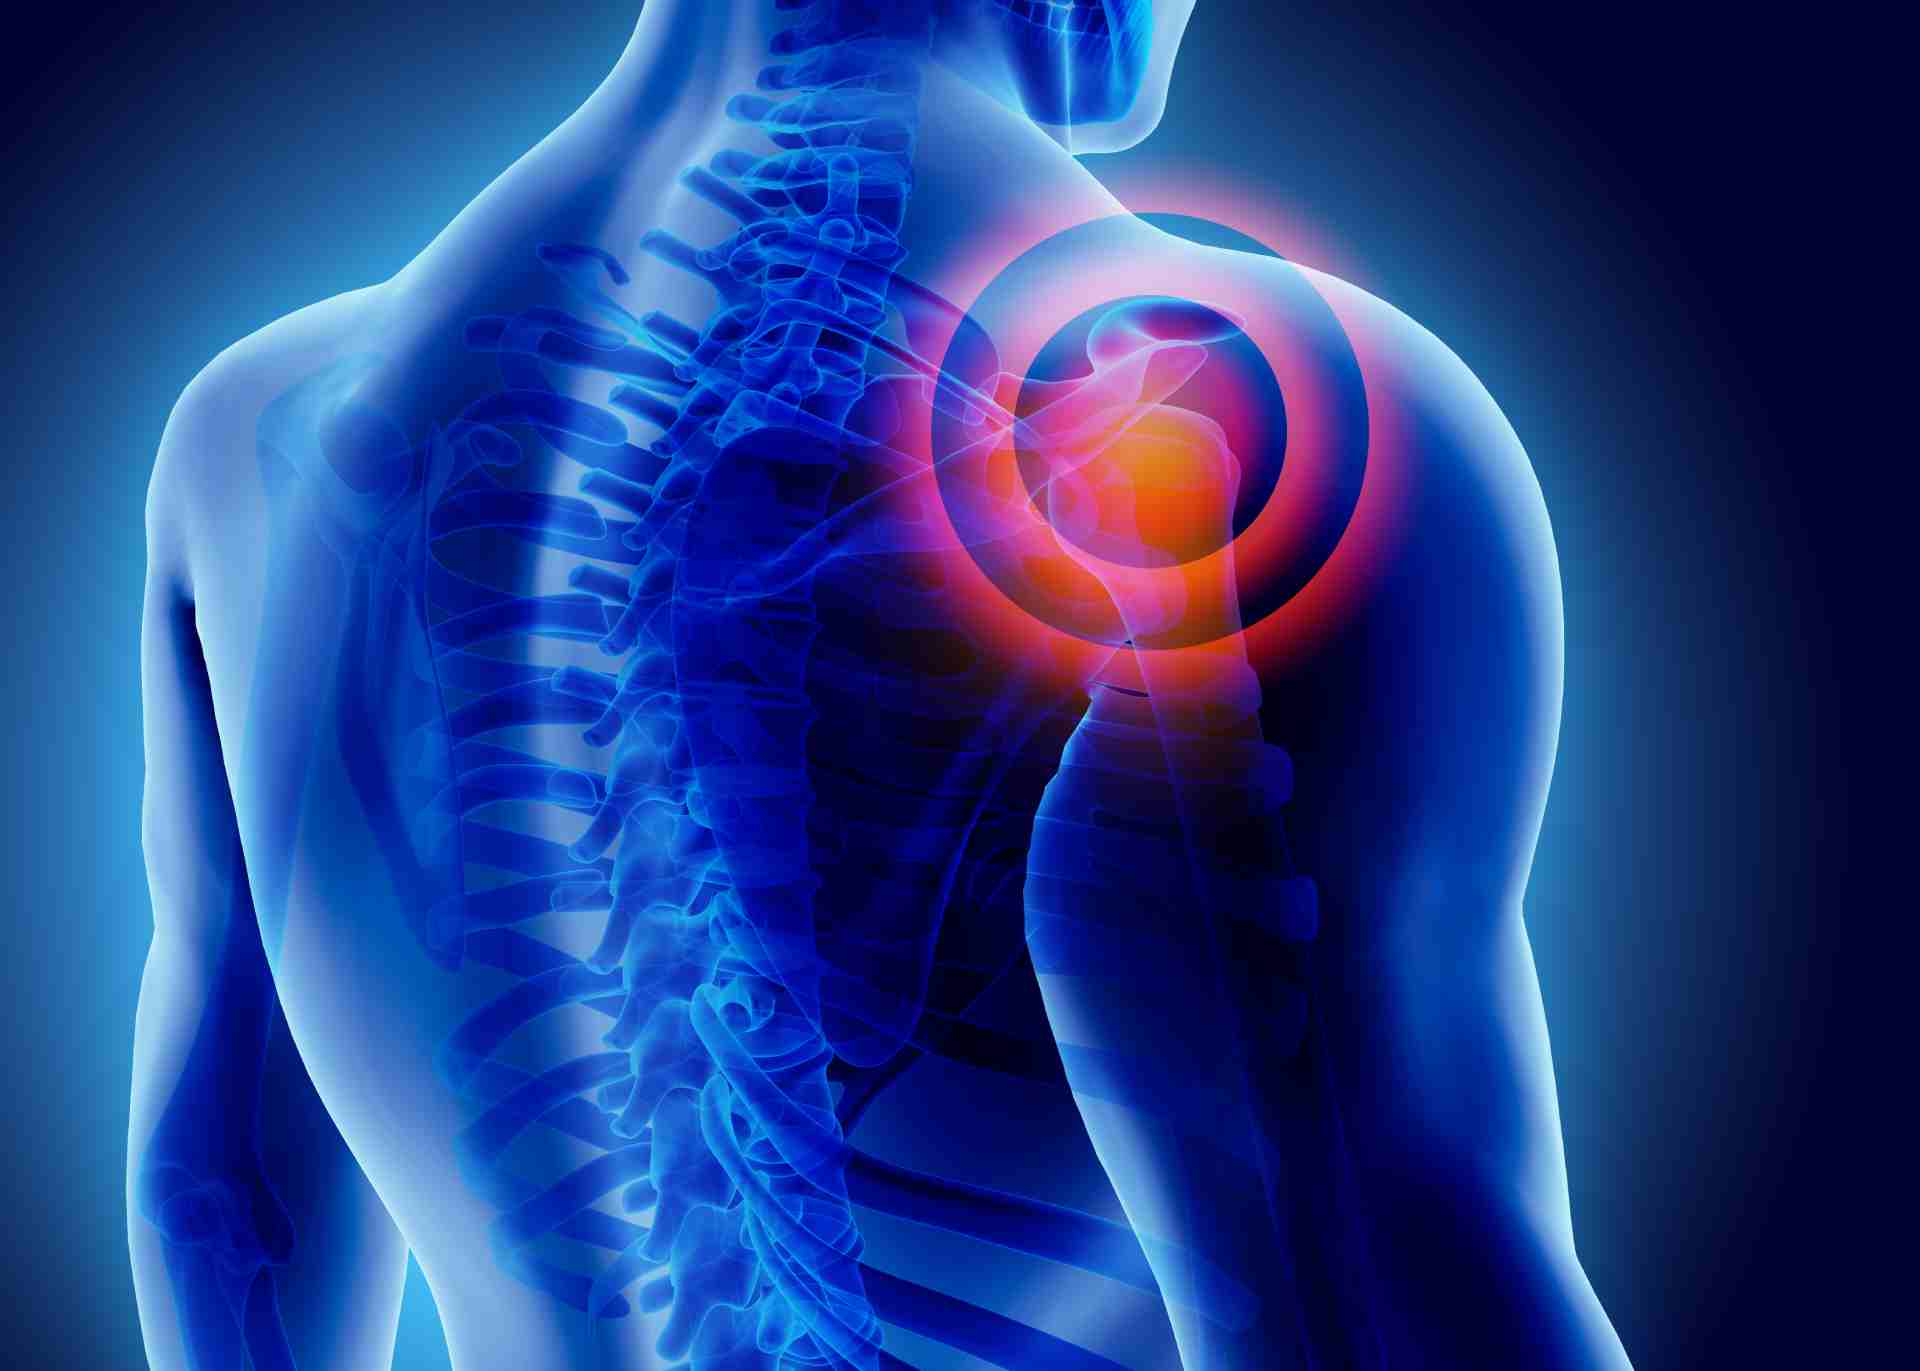 How To Relieve Shoulder Pain